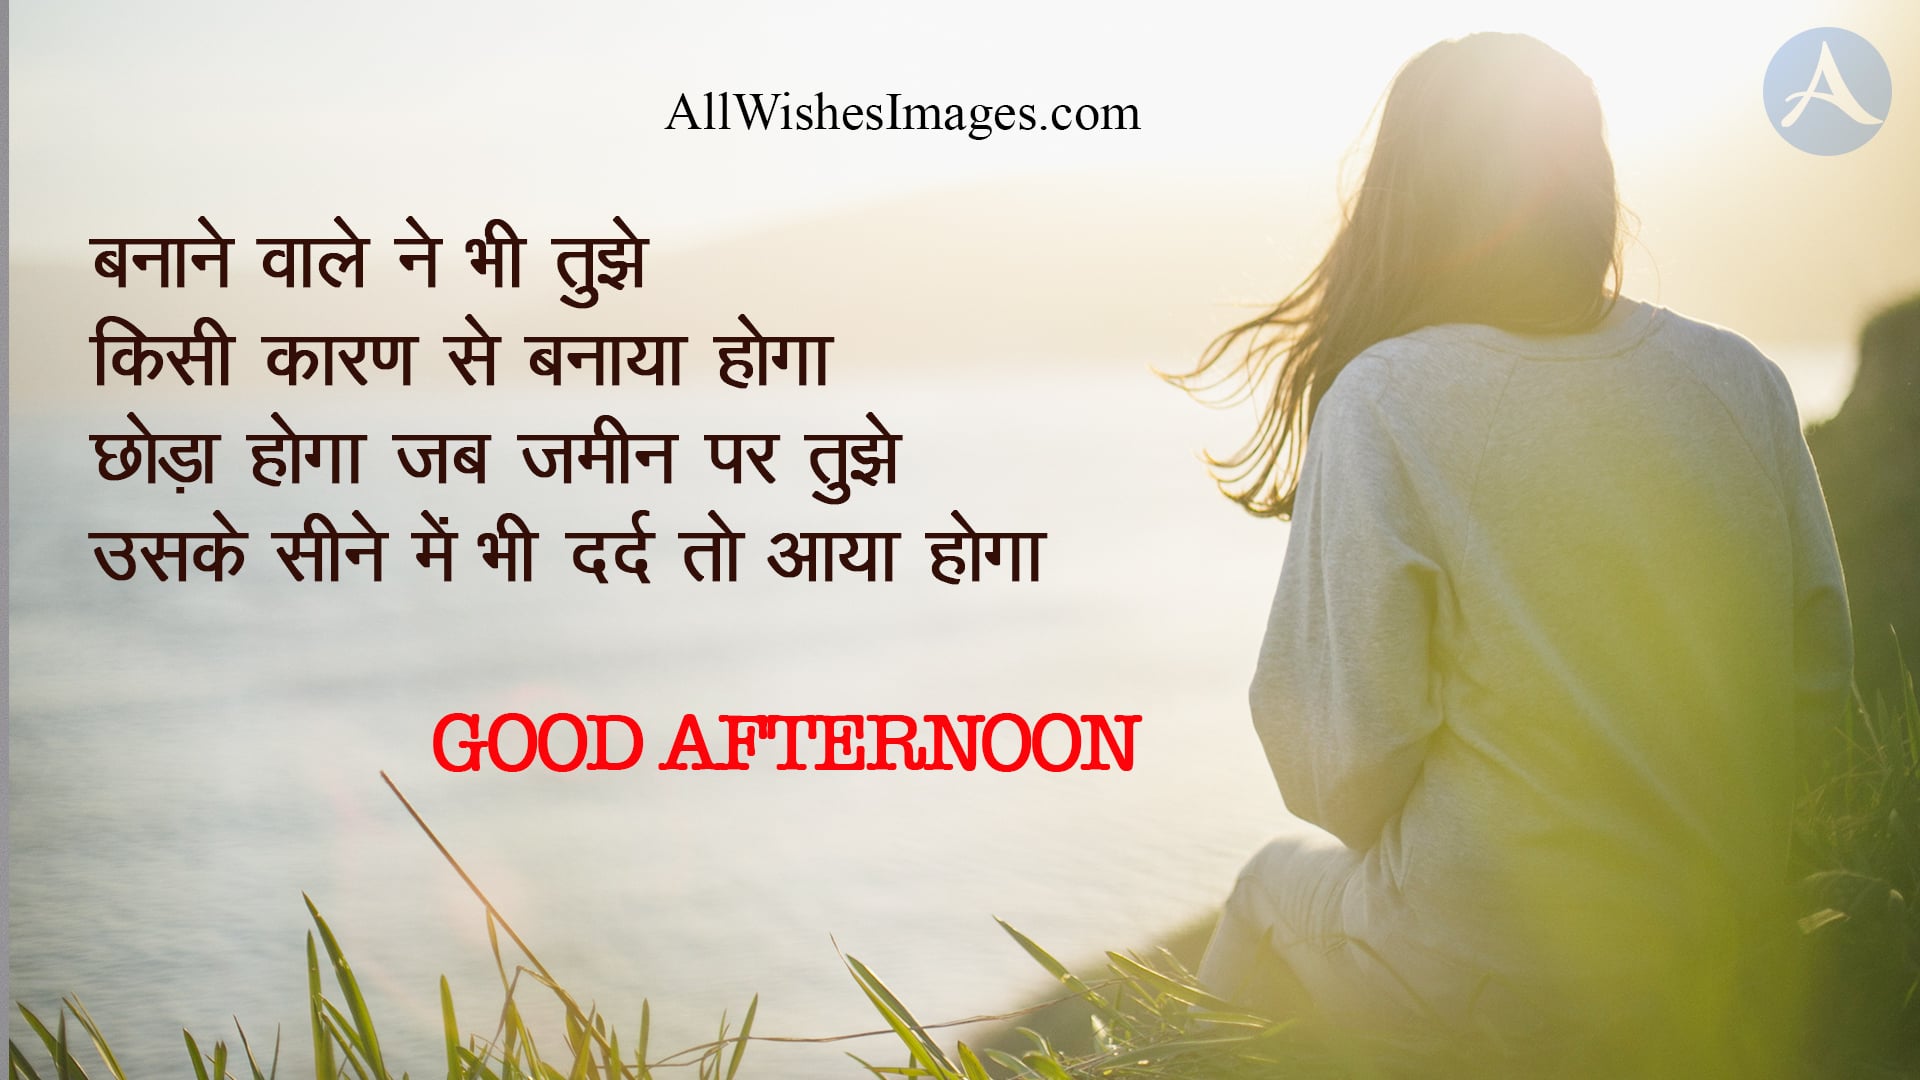 30+ Good Afternoon Image With Shayari || गुड आफ्टरनून इमेज विथ शायरी - All  Wishes Images - Images for WhatsApp